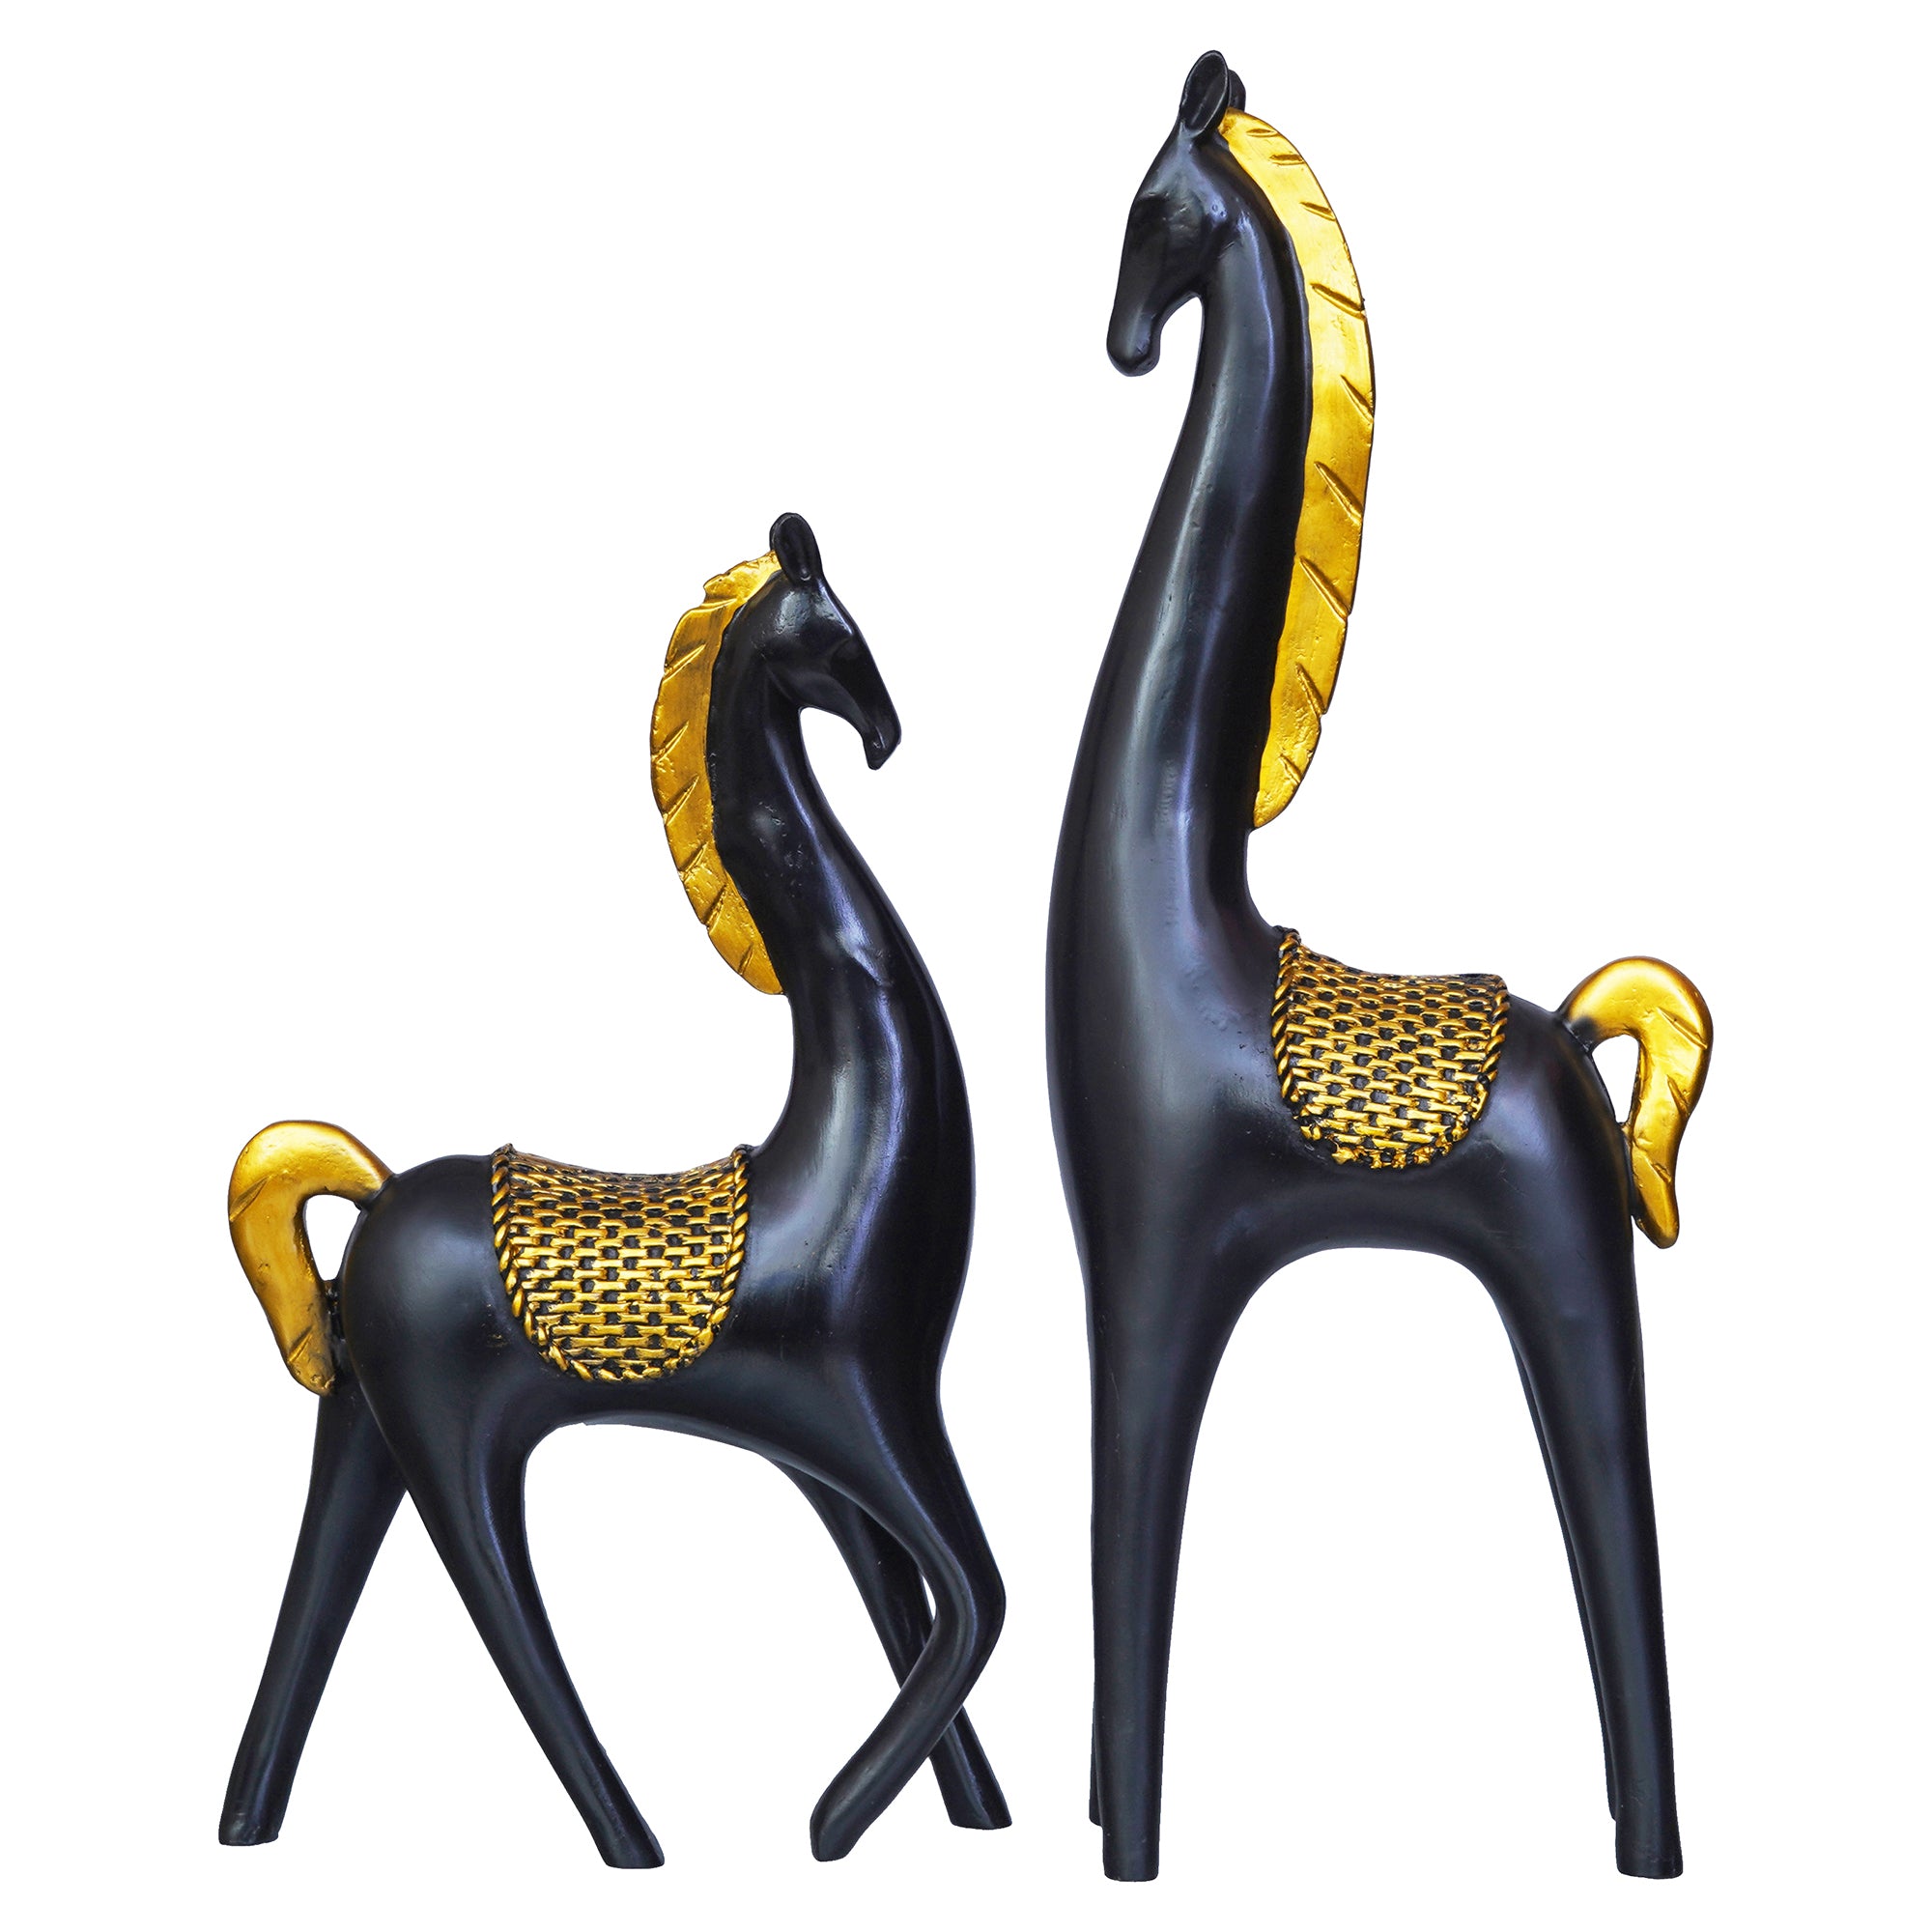 Set of 2 Black Horse Statues with Golden Hair Decorative Animal Figurines 6